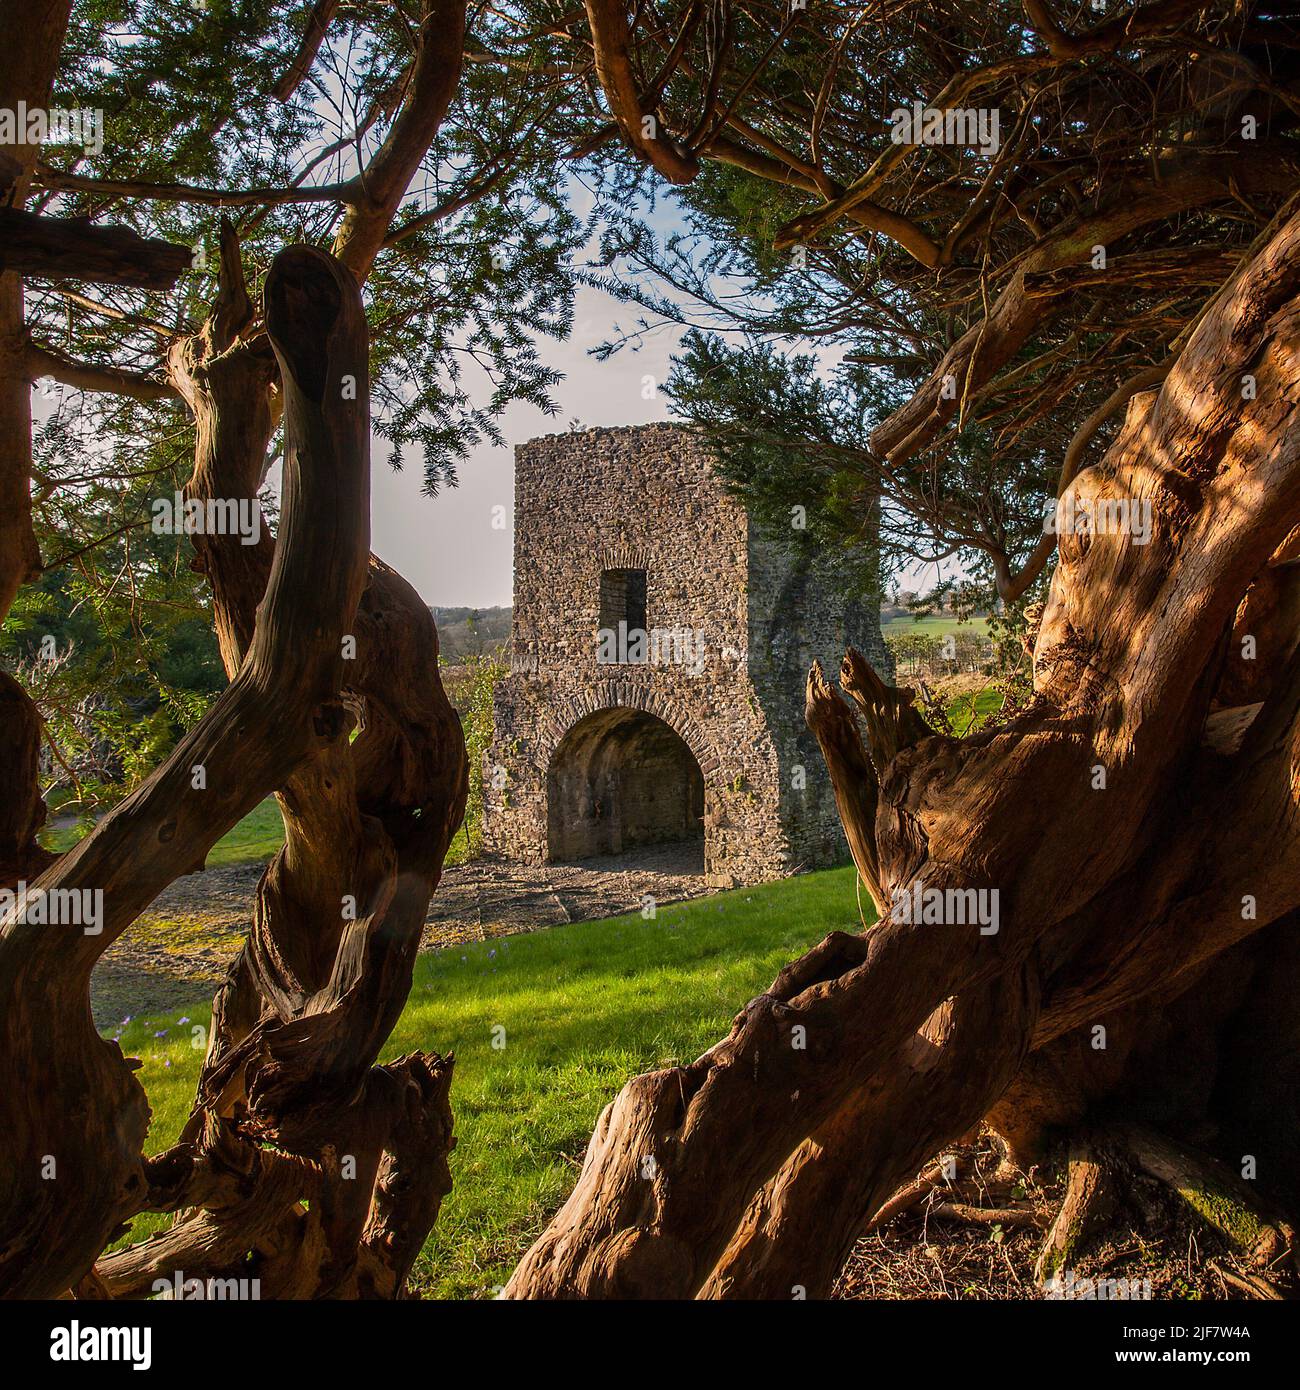 The Gate House viewed through the ancient Yew tunnel at Aberglasney Gardens Stock Photo